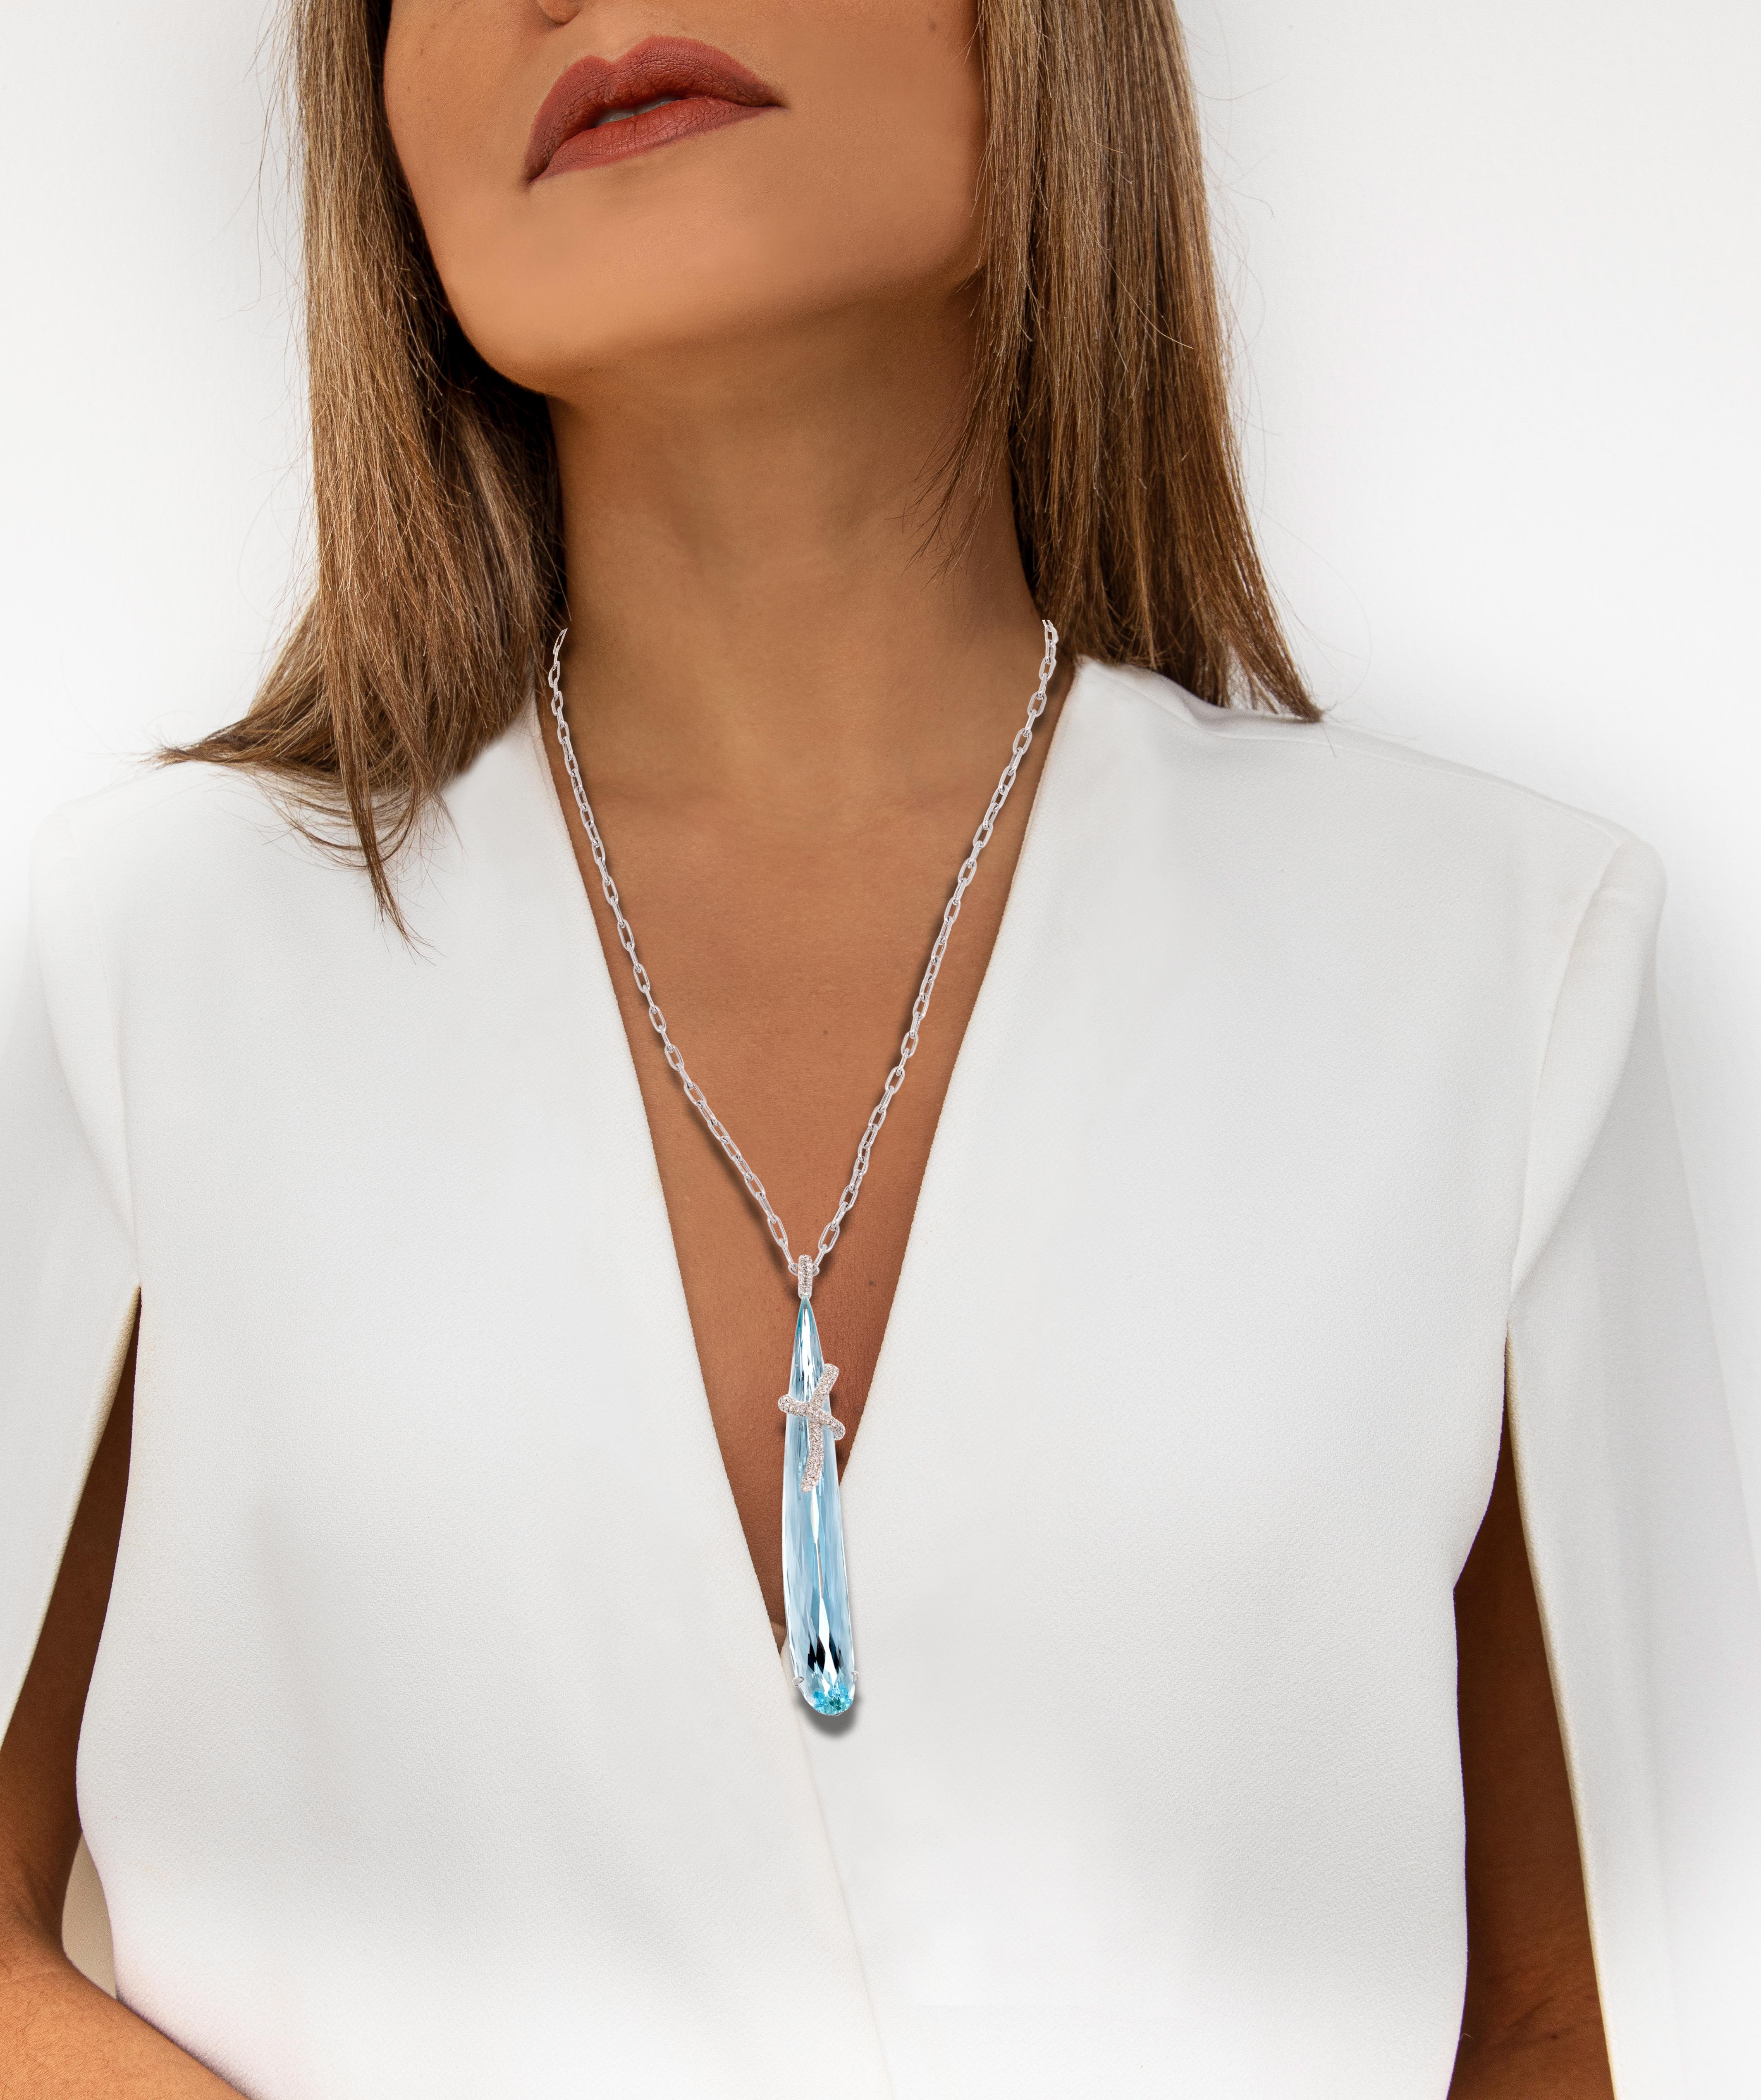 Rosior Contemporary White Gold Pendant Necklace set with:
- 1 Pear Cut Aquamarine with 28,9 ct;
- 119 F color, VVS clarity Diamonds with 0,84 ct.
Pendant is approximately 3